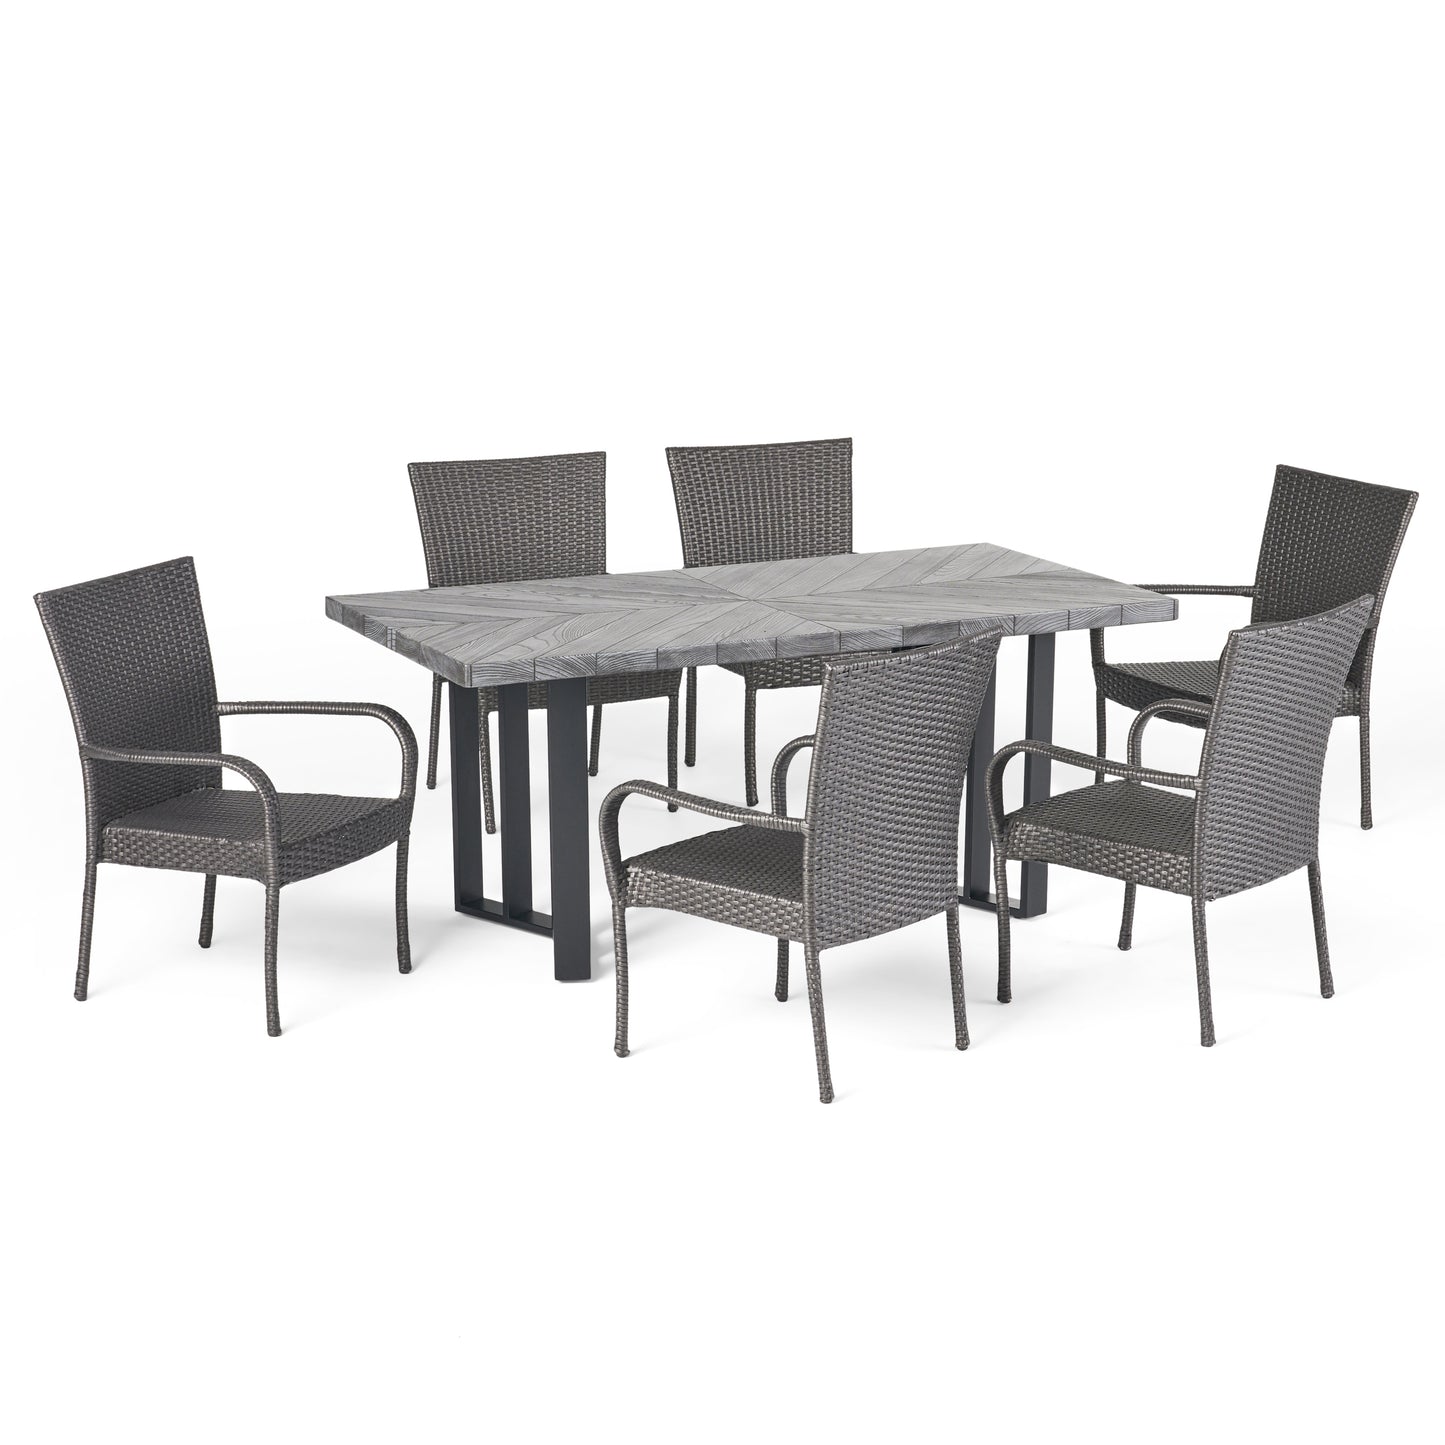 Fiona Outdoor 7 Piece Wicker Dining Set with Concrete Dining Table